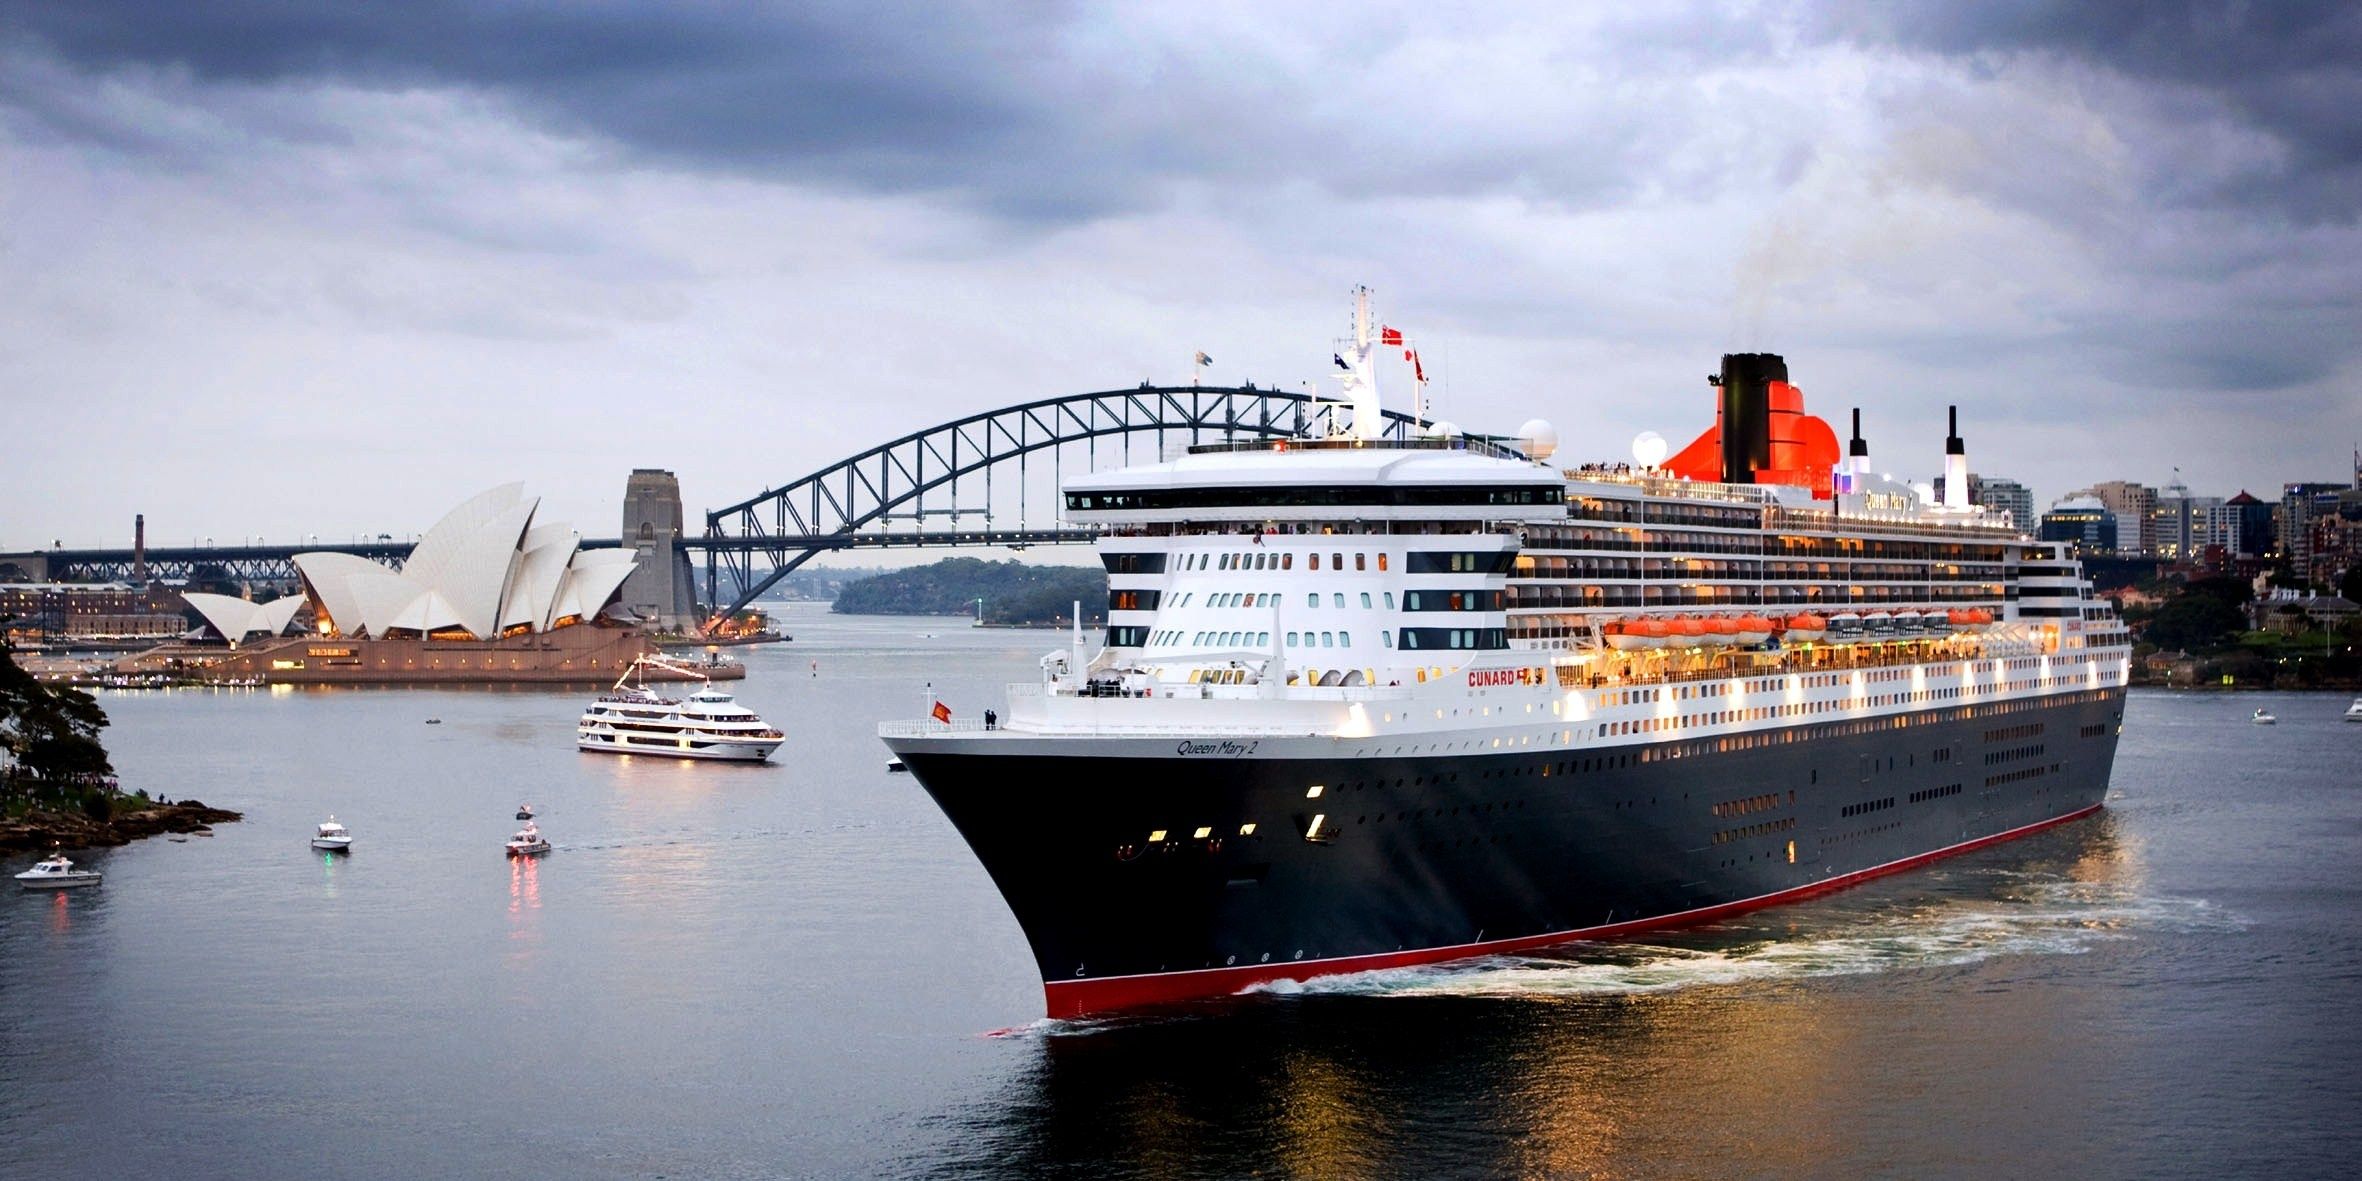 Wallpaper. Beautiful picture. photo. picture. ship, cruise liner, Liner, Queen Mary the city